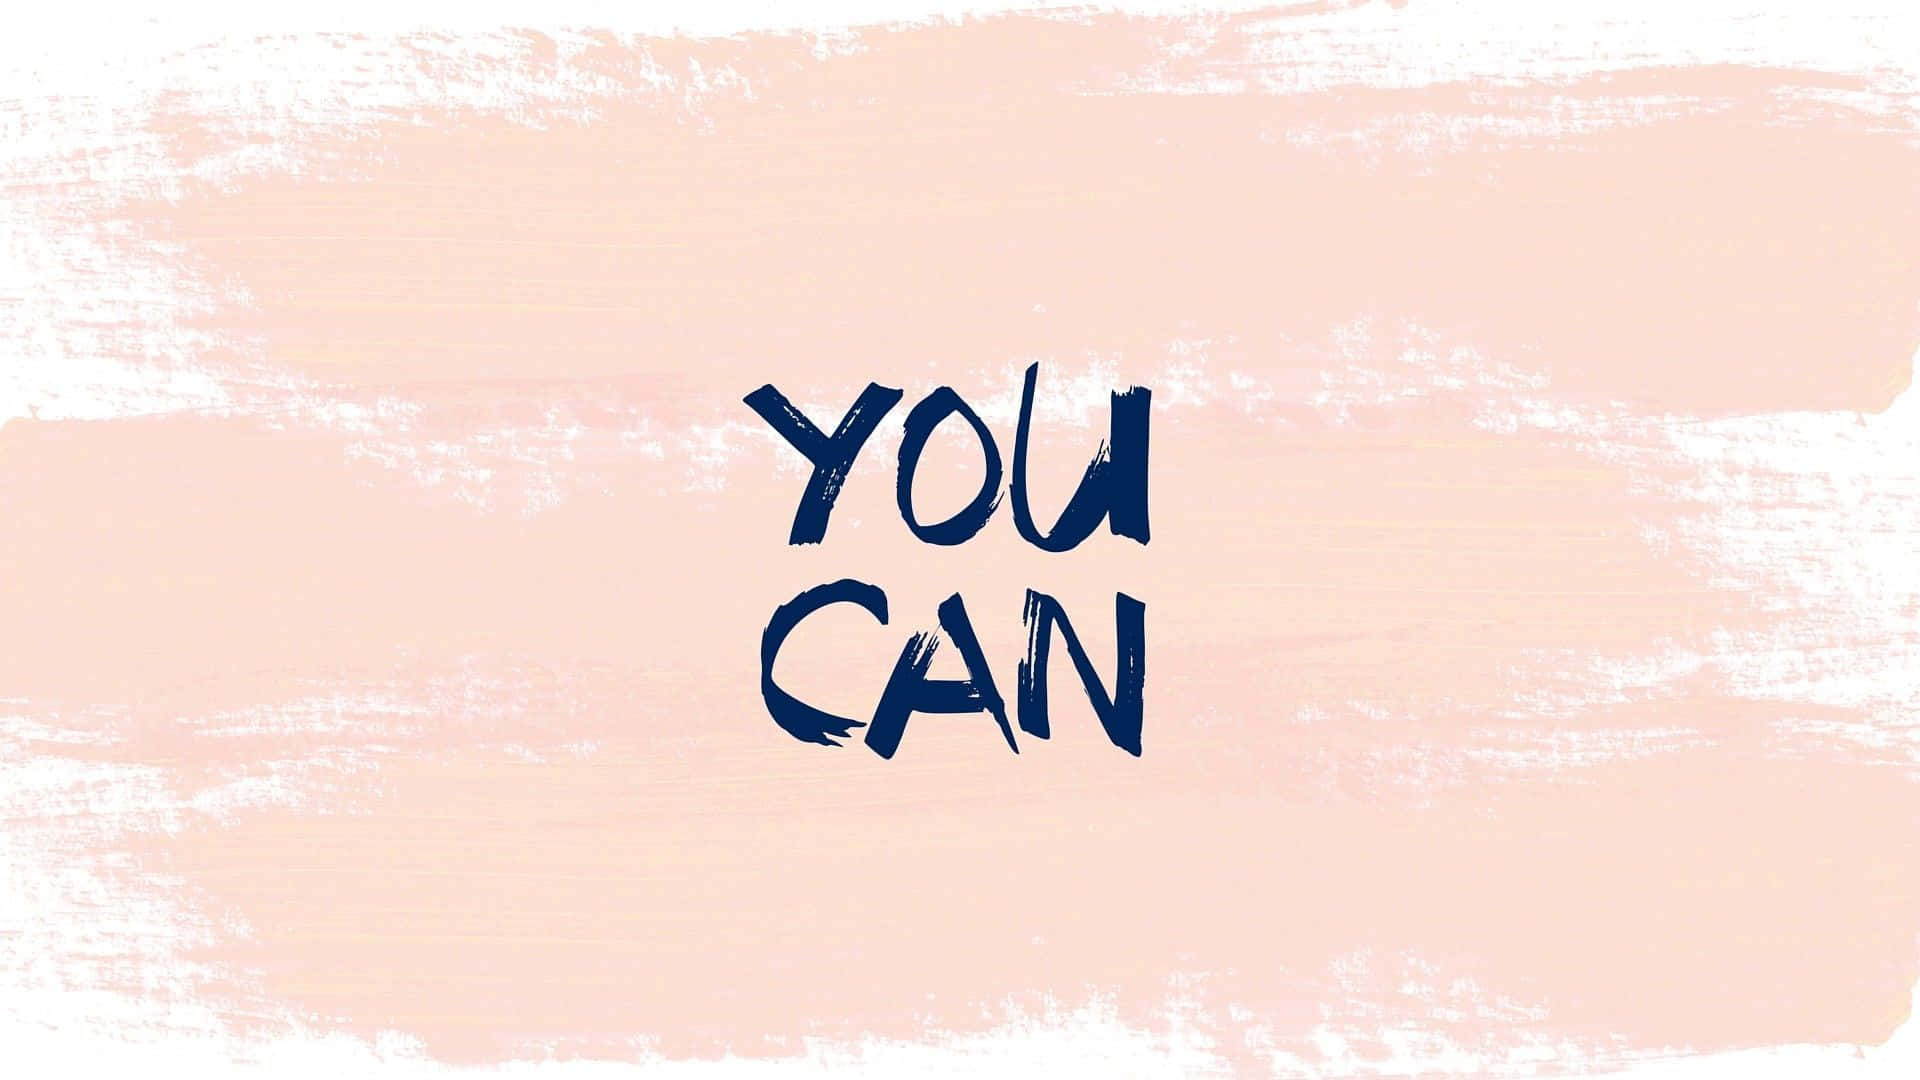 Find Motivation with this Cute Desktop Background Wallpaper